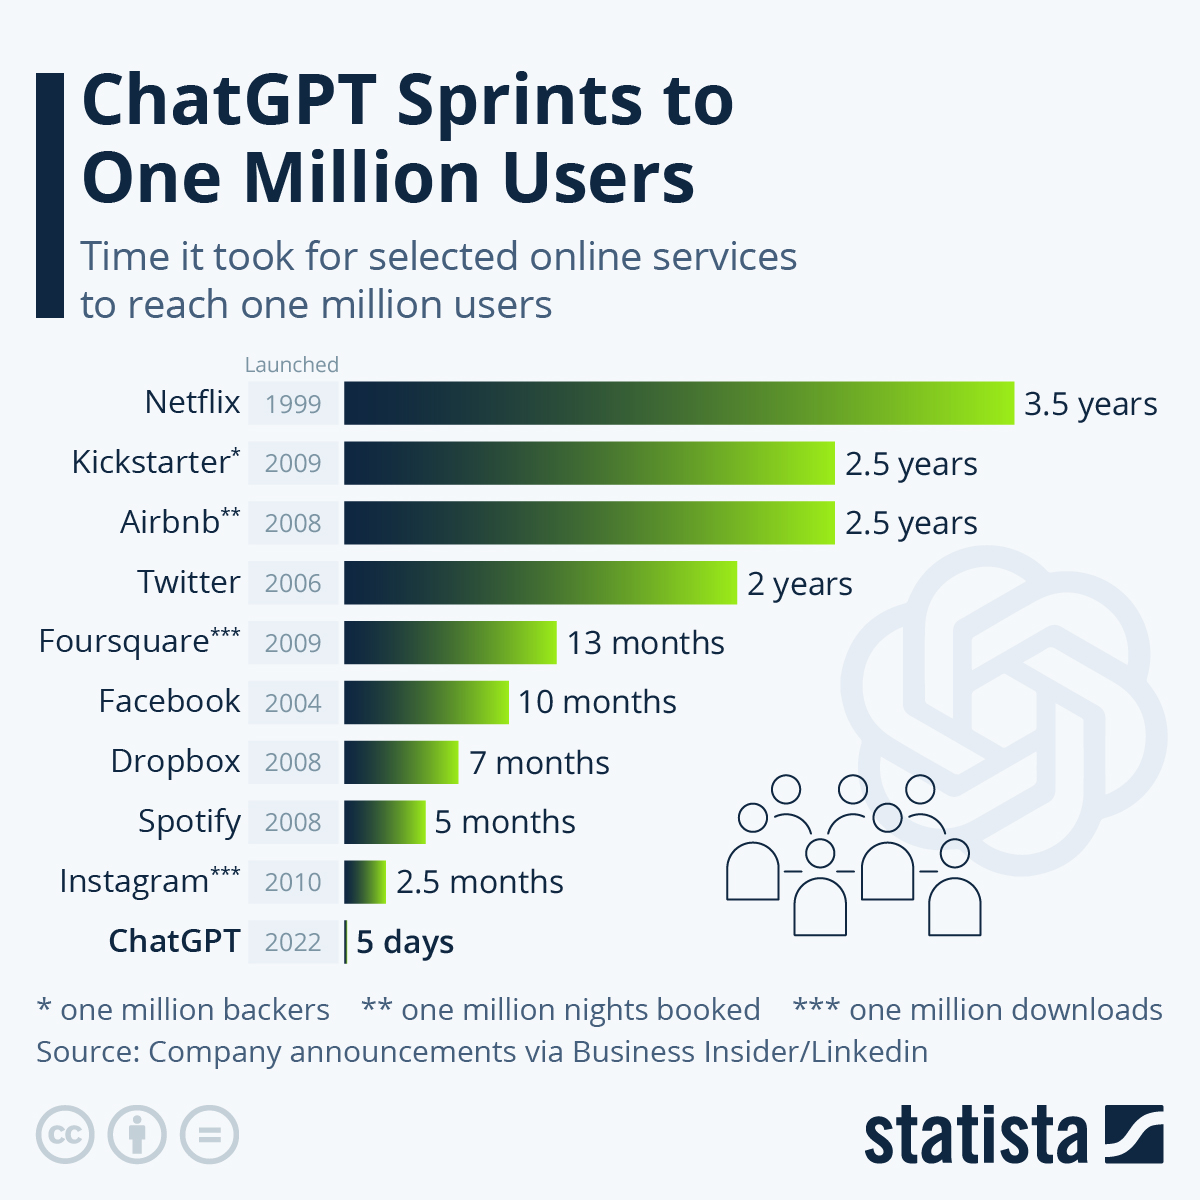 chat gpt sprints to 1m users